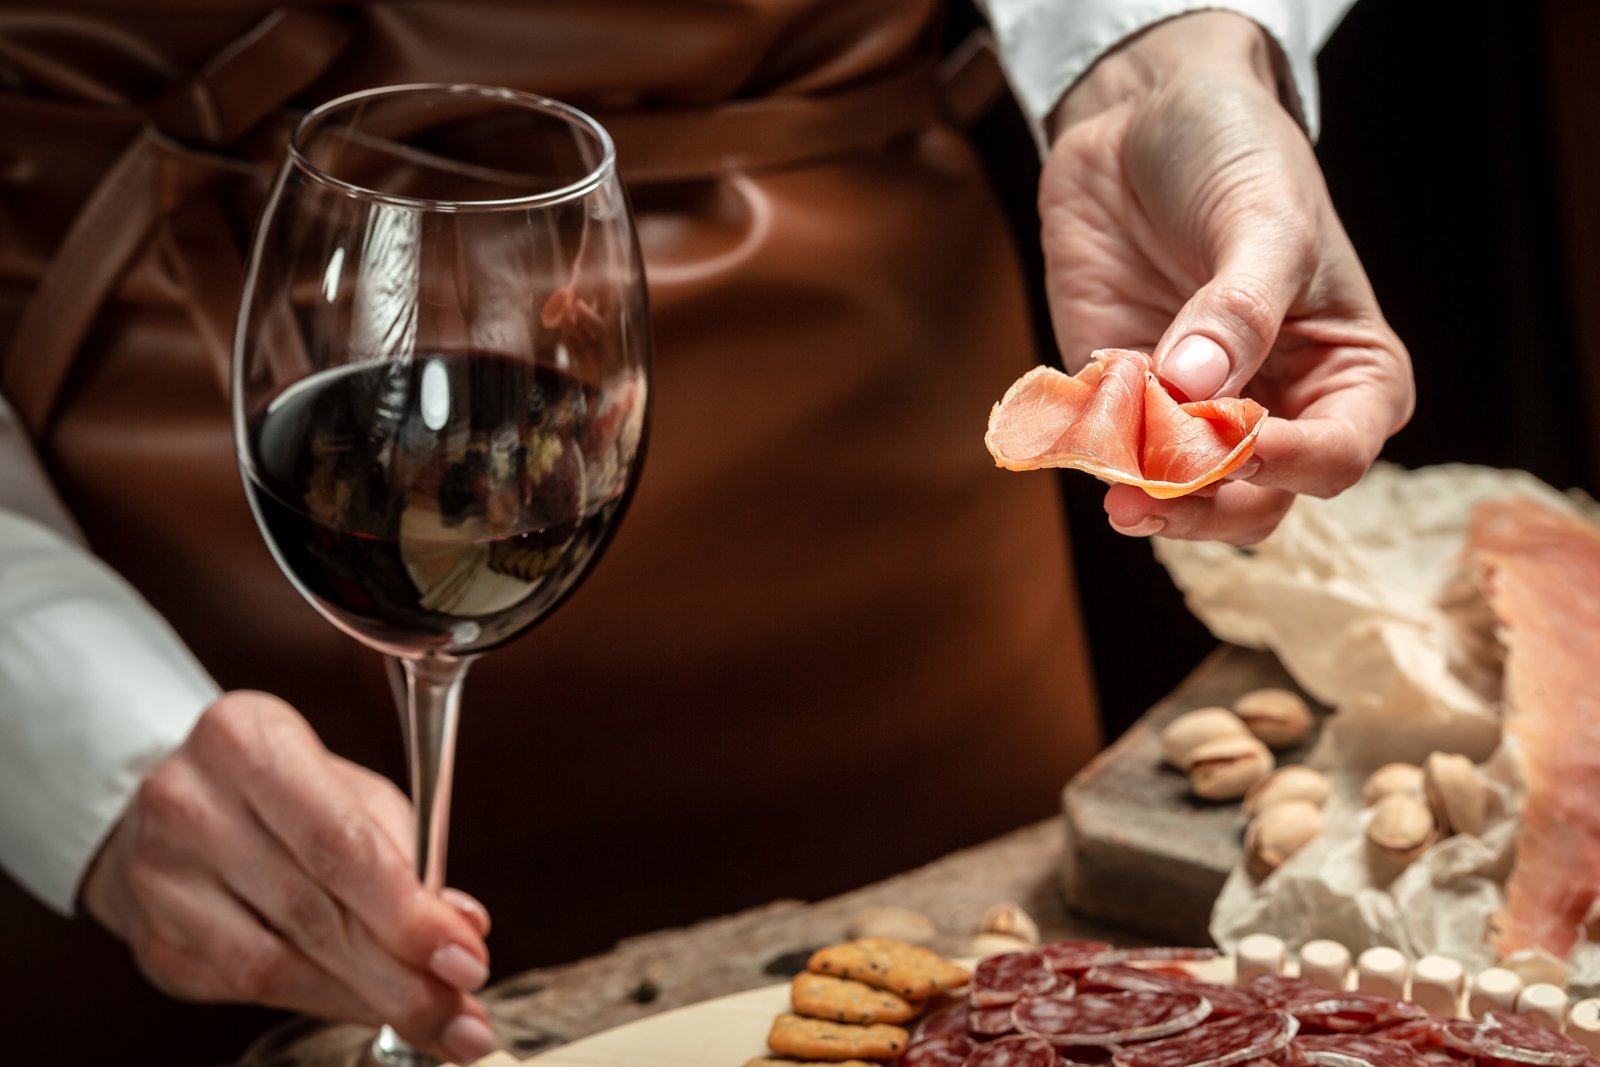 Parma is renowned as a centre of Italian gastronomy: wine, cheese, fresh pasta and more!